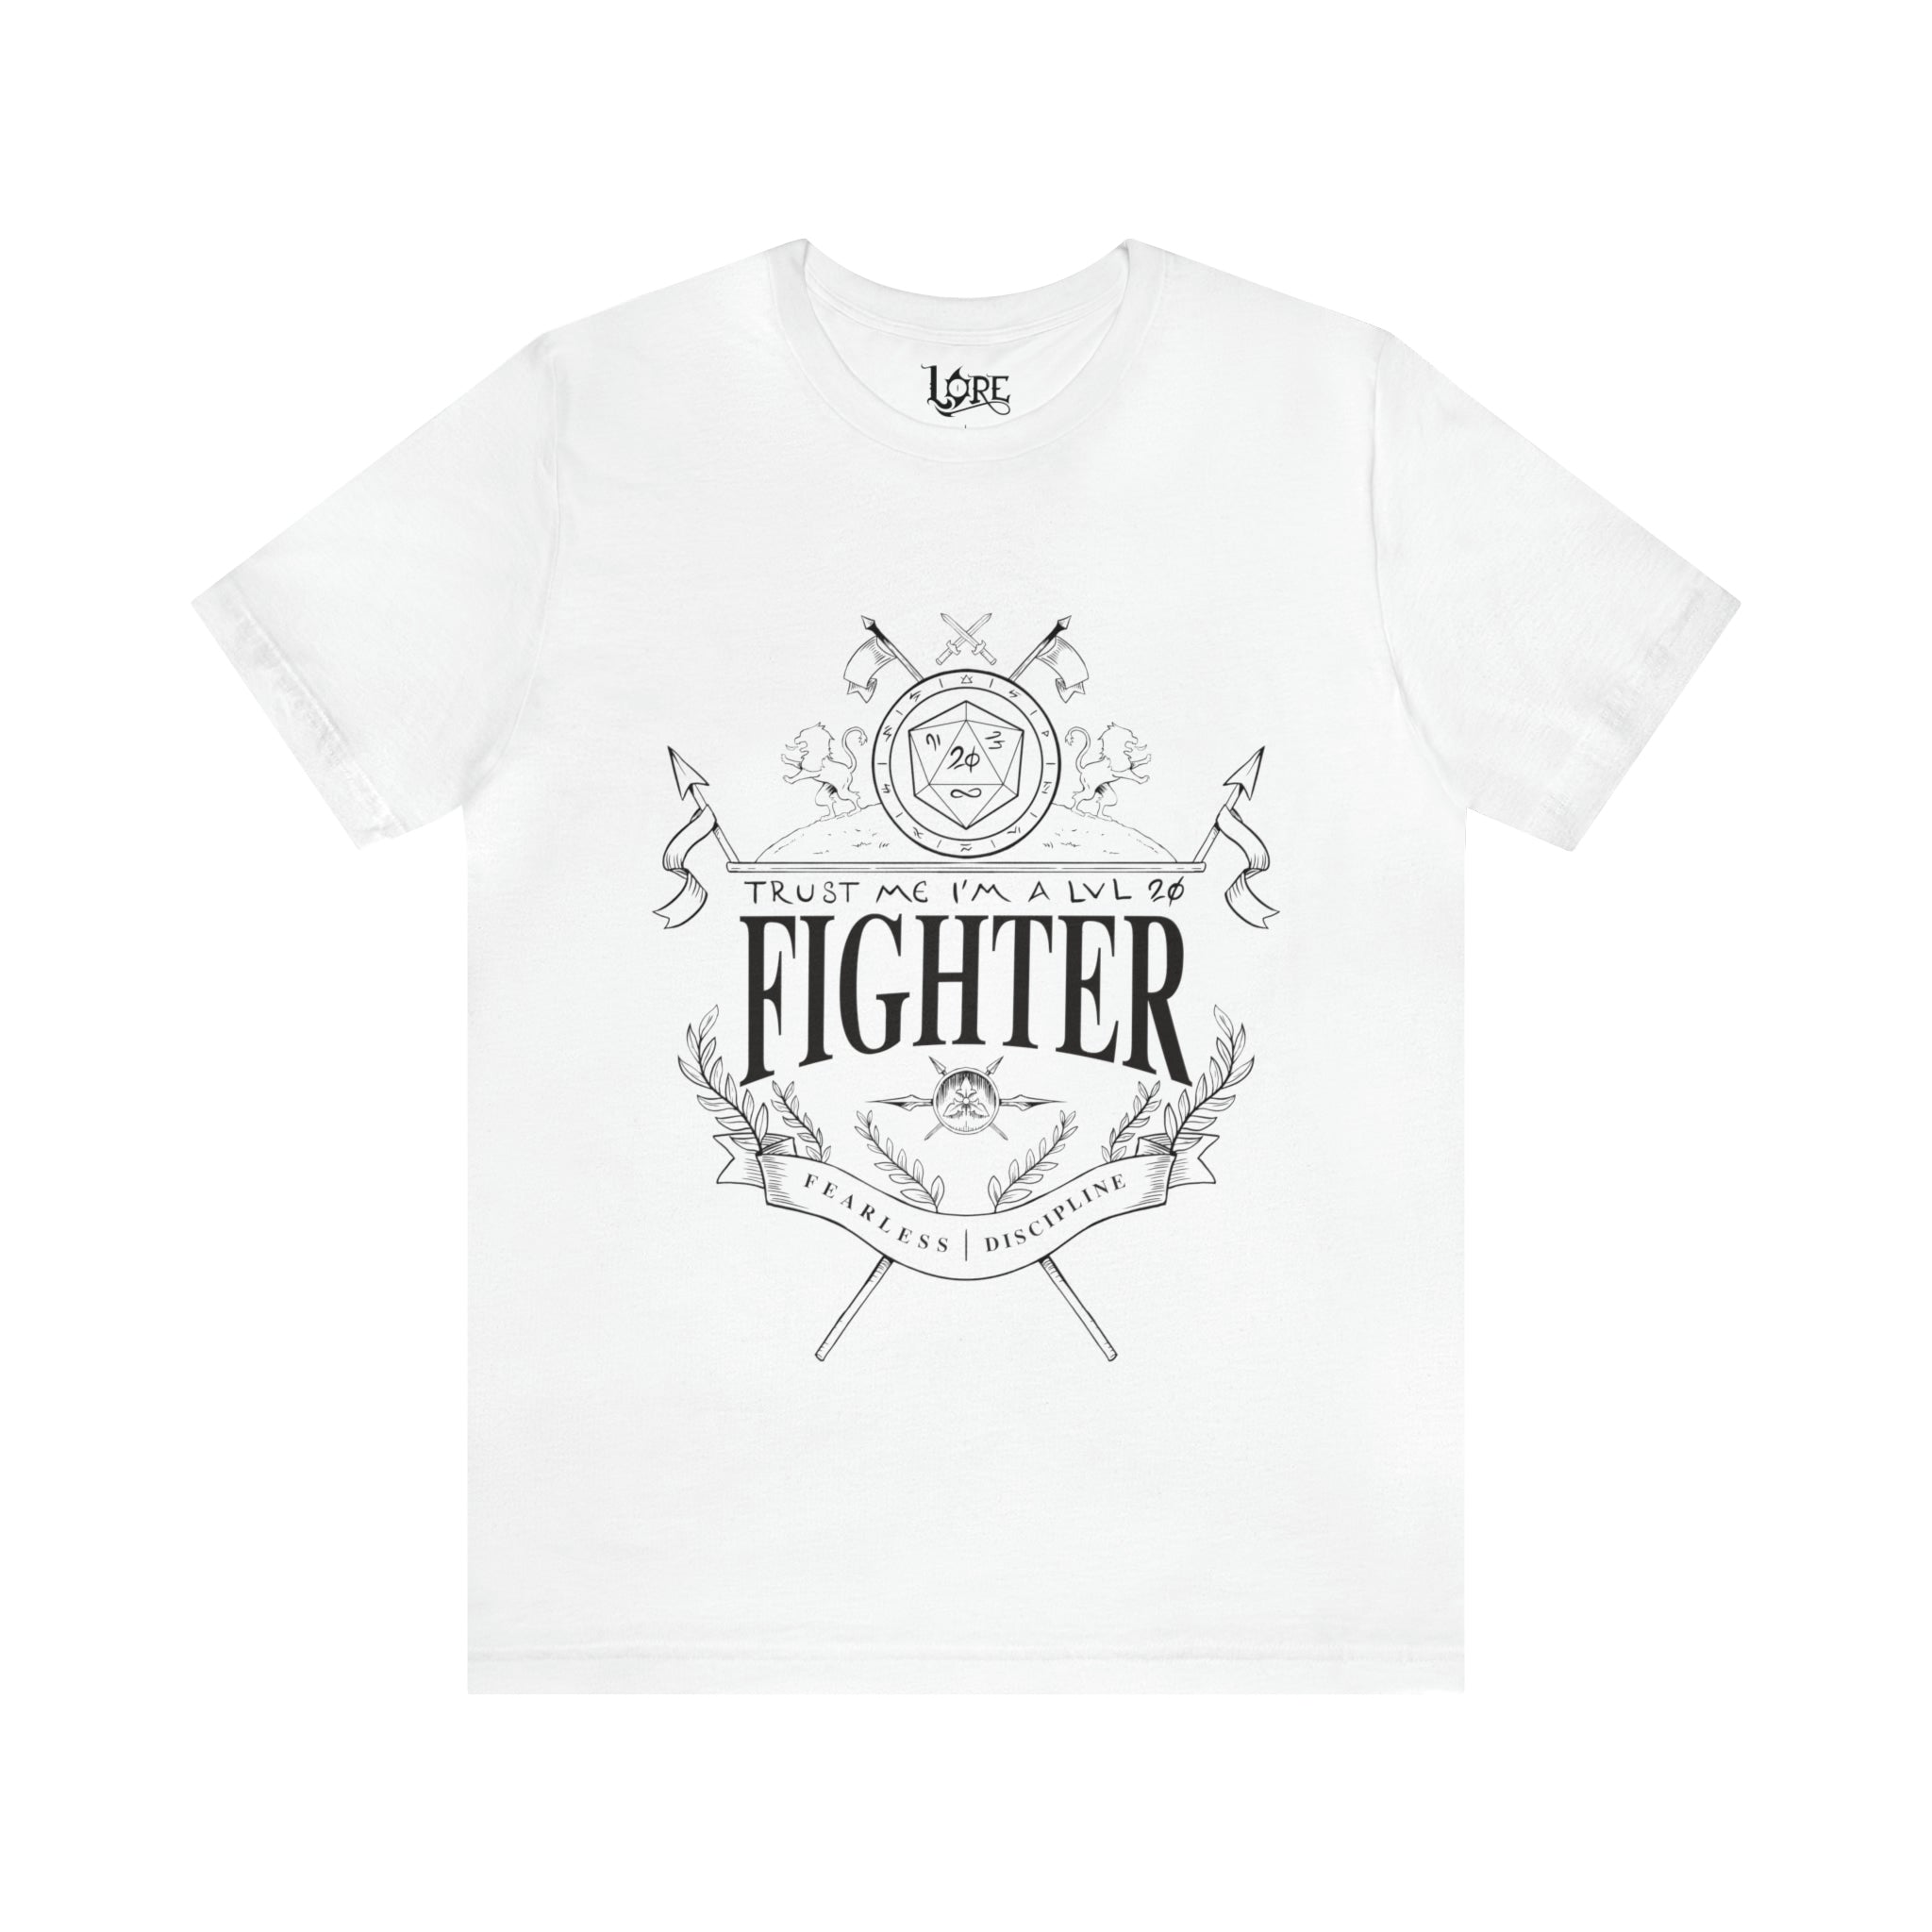 TRUST ME I'M A LEVEL 20 FIGHTER T-SHIRT